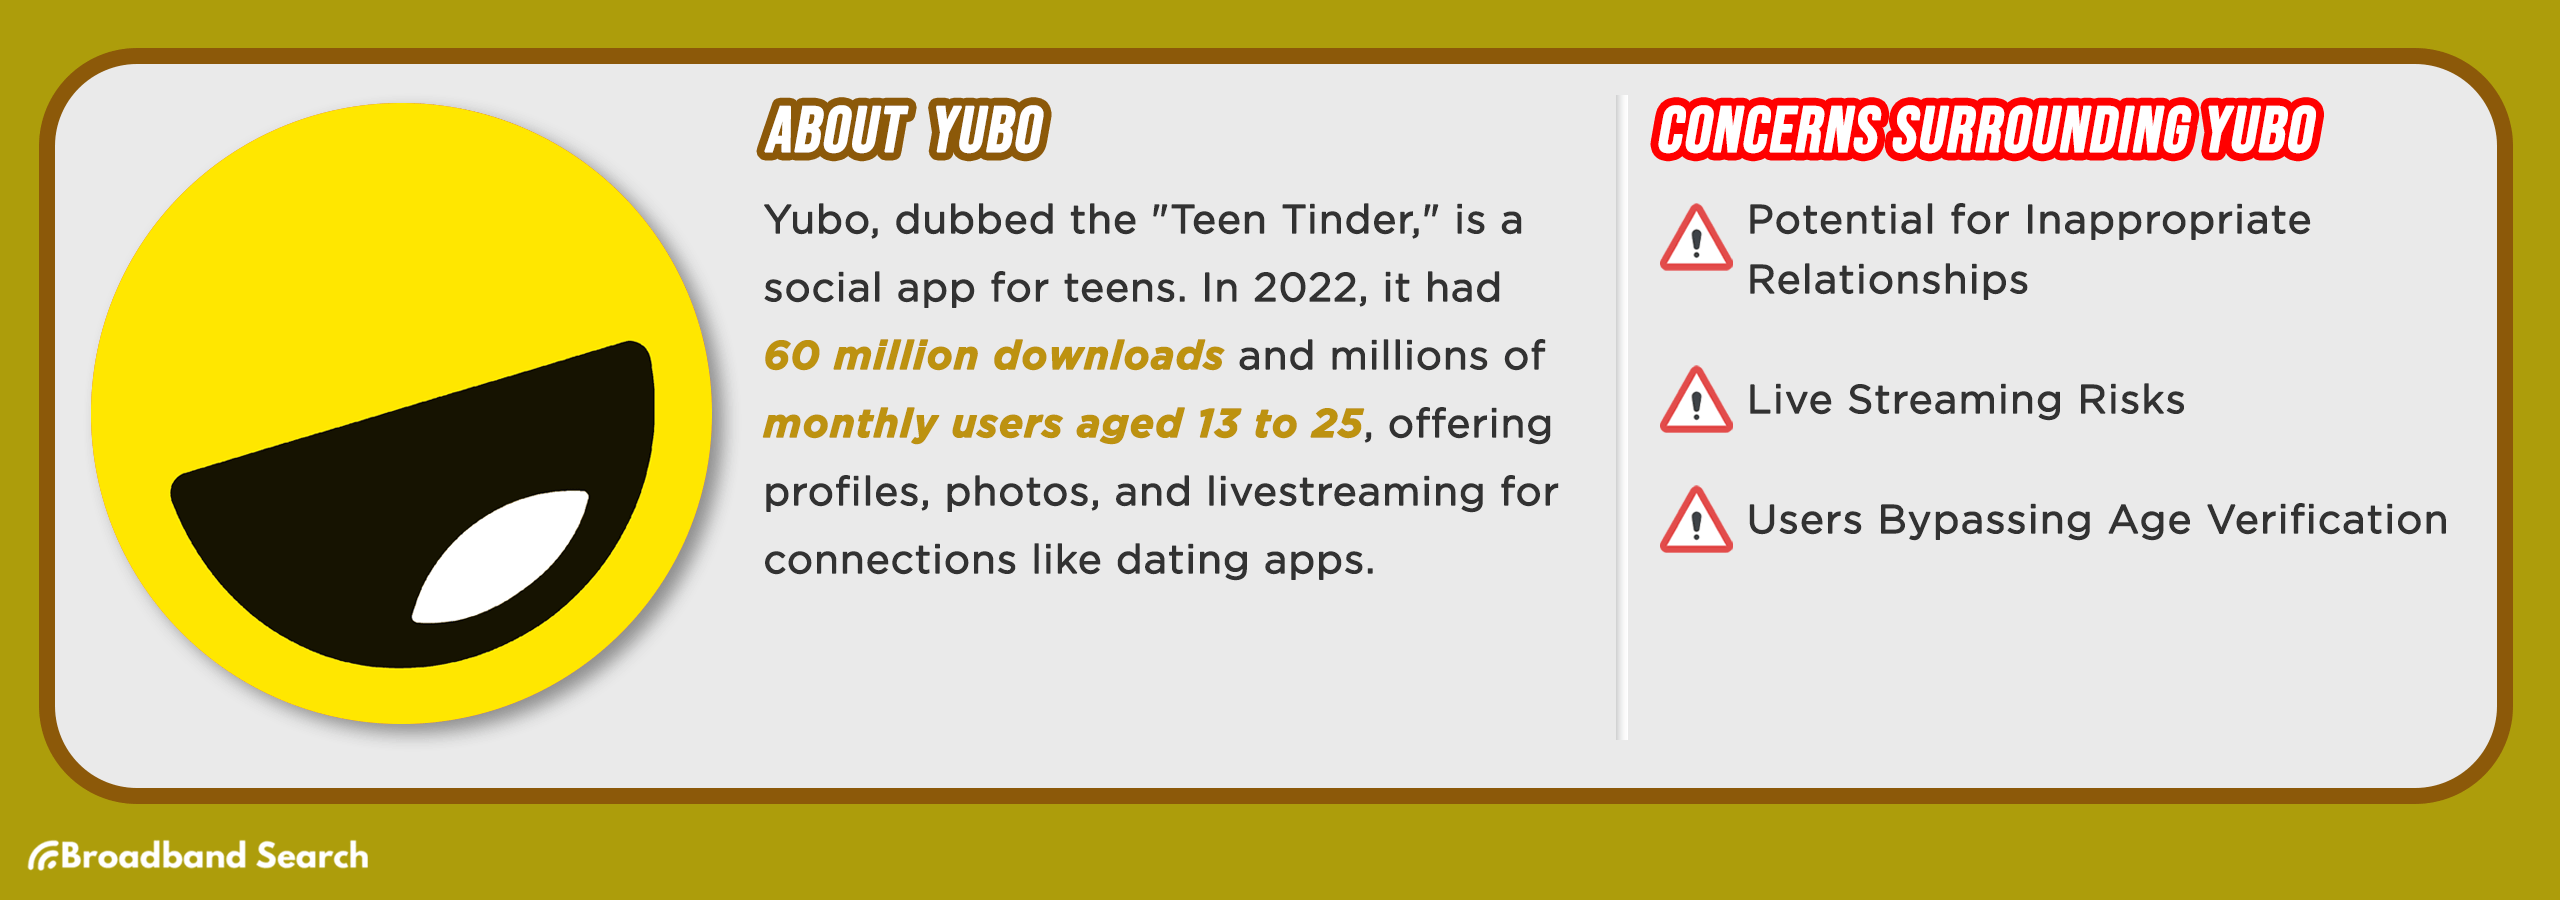 Statistics on Yubo and concerns surrounding usage of the social media app